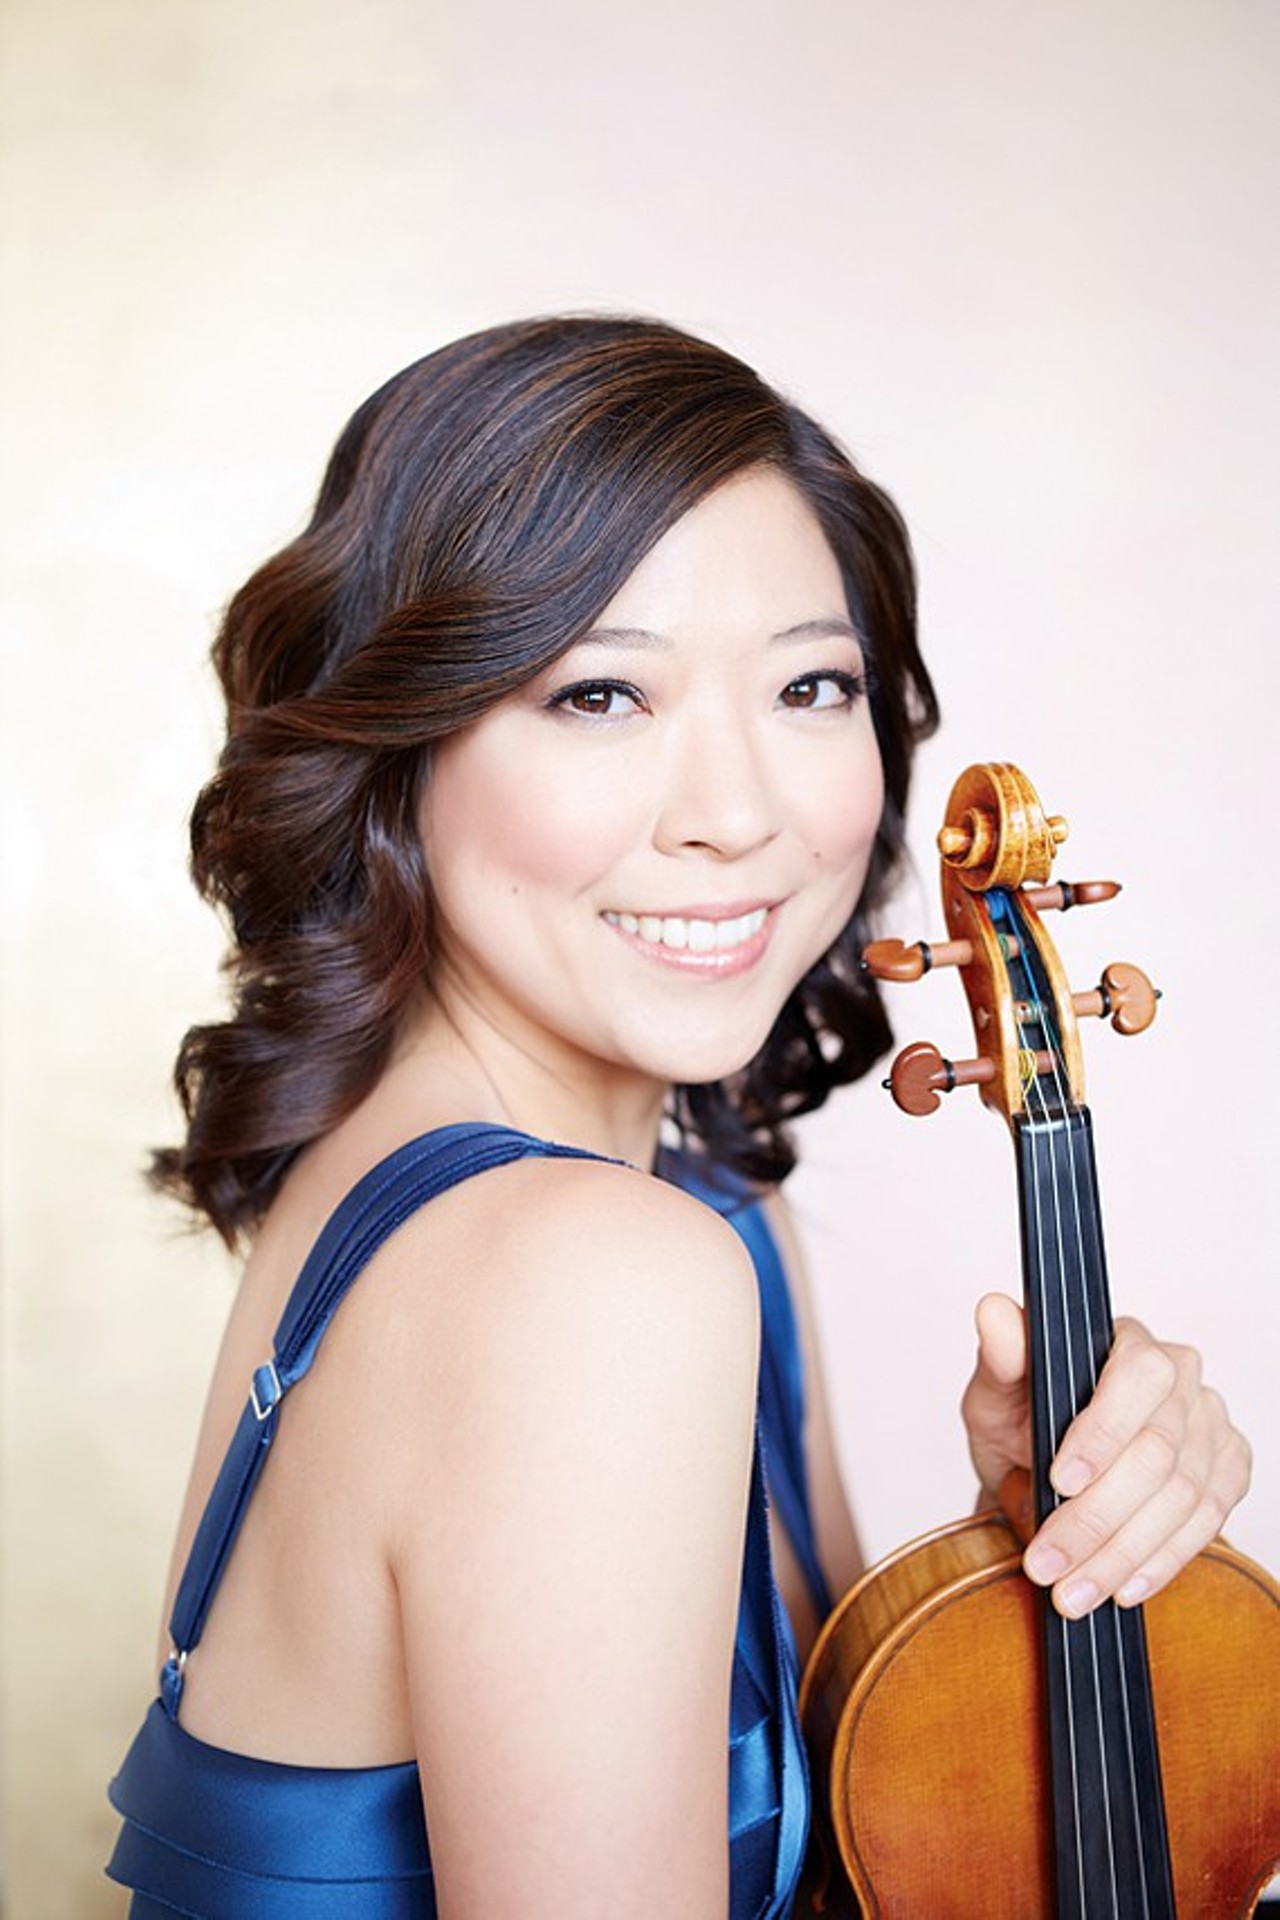 The Classical Ambassador: Amy LeeViolinist, Cleveland Orchestra; Member, Ensemble HD
Amy Lee was only 12 when she decided that the violin should be something more than a hobby in her life.
"That's when I decided this is what I wanted to do; I totally fell in love. I wanted to become a violinist," says Lee, now the associate concertmaster of the Cleveland Orchestra. So she asked her parents if they'd move from Korea to the Philadelphia area so she could be around the music conservatories there. The very next year they made the move. In short time, Lee won a competition and soloed with the Philadelphia Orchestra &#150; at the tender age of 15. At 16, she enrolled at the prestigious Curtis Institute of Music. After her bachelor's there, she got her master's degree at the Julliard School in Manhattan.
"Right when I was finishing up my grad school, and started looking around for what positions were available, this was one of them," she said. "I came here totally not expecting to win such a great position out of school, but they were so nice and gave me a chance."
Soon after arriving to Cleveland in 2008, she met her future husband, the orchestra's principal oboe player, Frank Rosenwein. They married in 2012.
Together, they'd excel on stage and in front of packed crowds at Severance Hall and New York and across Europe, but they'd also take part in fun side projects, like the Ensemble HD, an idea born by principal flutist Josh Smith and the Happy Dog's Sean Watterson. The idea was simple: A small group from the orchestra would perform at the westside bar.
"We thought, look, let's connect with these people who would otherwise never get to hear what we do, and let's show them that this is something they can enjoy as much as other genres of music," says Lee. "We went out there to the bar, put on a show, and it was so successful. People loved it. We were like rockstars playing Beethoven; it was so great."
Lee and Rosenwein are also part of a Cleveland-based group called PAND (Performers and Artists for Nuclear Disarmament), putting on shows to raise awareness of the dangers of nuclear weapons. They are both professors too &#151; Rosenwein at the Cleveland Institute of Music, Lee at Kent State. And Lee also performs with a group called the Omni Quartet with three other orchestra members, who also happen to be her best friends and bridesmaids.
In seven years, there are many memories, but Lee's favorite moments so far in the Cleveland Orchestra happened during European tours. "One was Rusalka, the opera by Dvorak, that we did in Salzburg. Every concert was an out-of-body experience. It was so beautiful, so amazing, and I will never forget the experience. After that, doing Brahms' Deutsches Requiem in Vienna, that was just a very special experience. The orchestra just really came together in this beautiful hall where Brahms had performed it."
From where Brahms performed his masterpiece to where you eat hot dogs and tater tots. No big deal.
By: Doug Brown